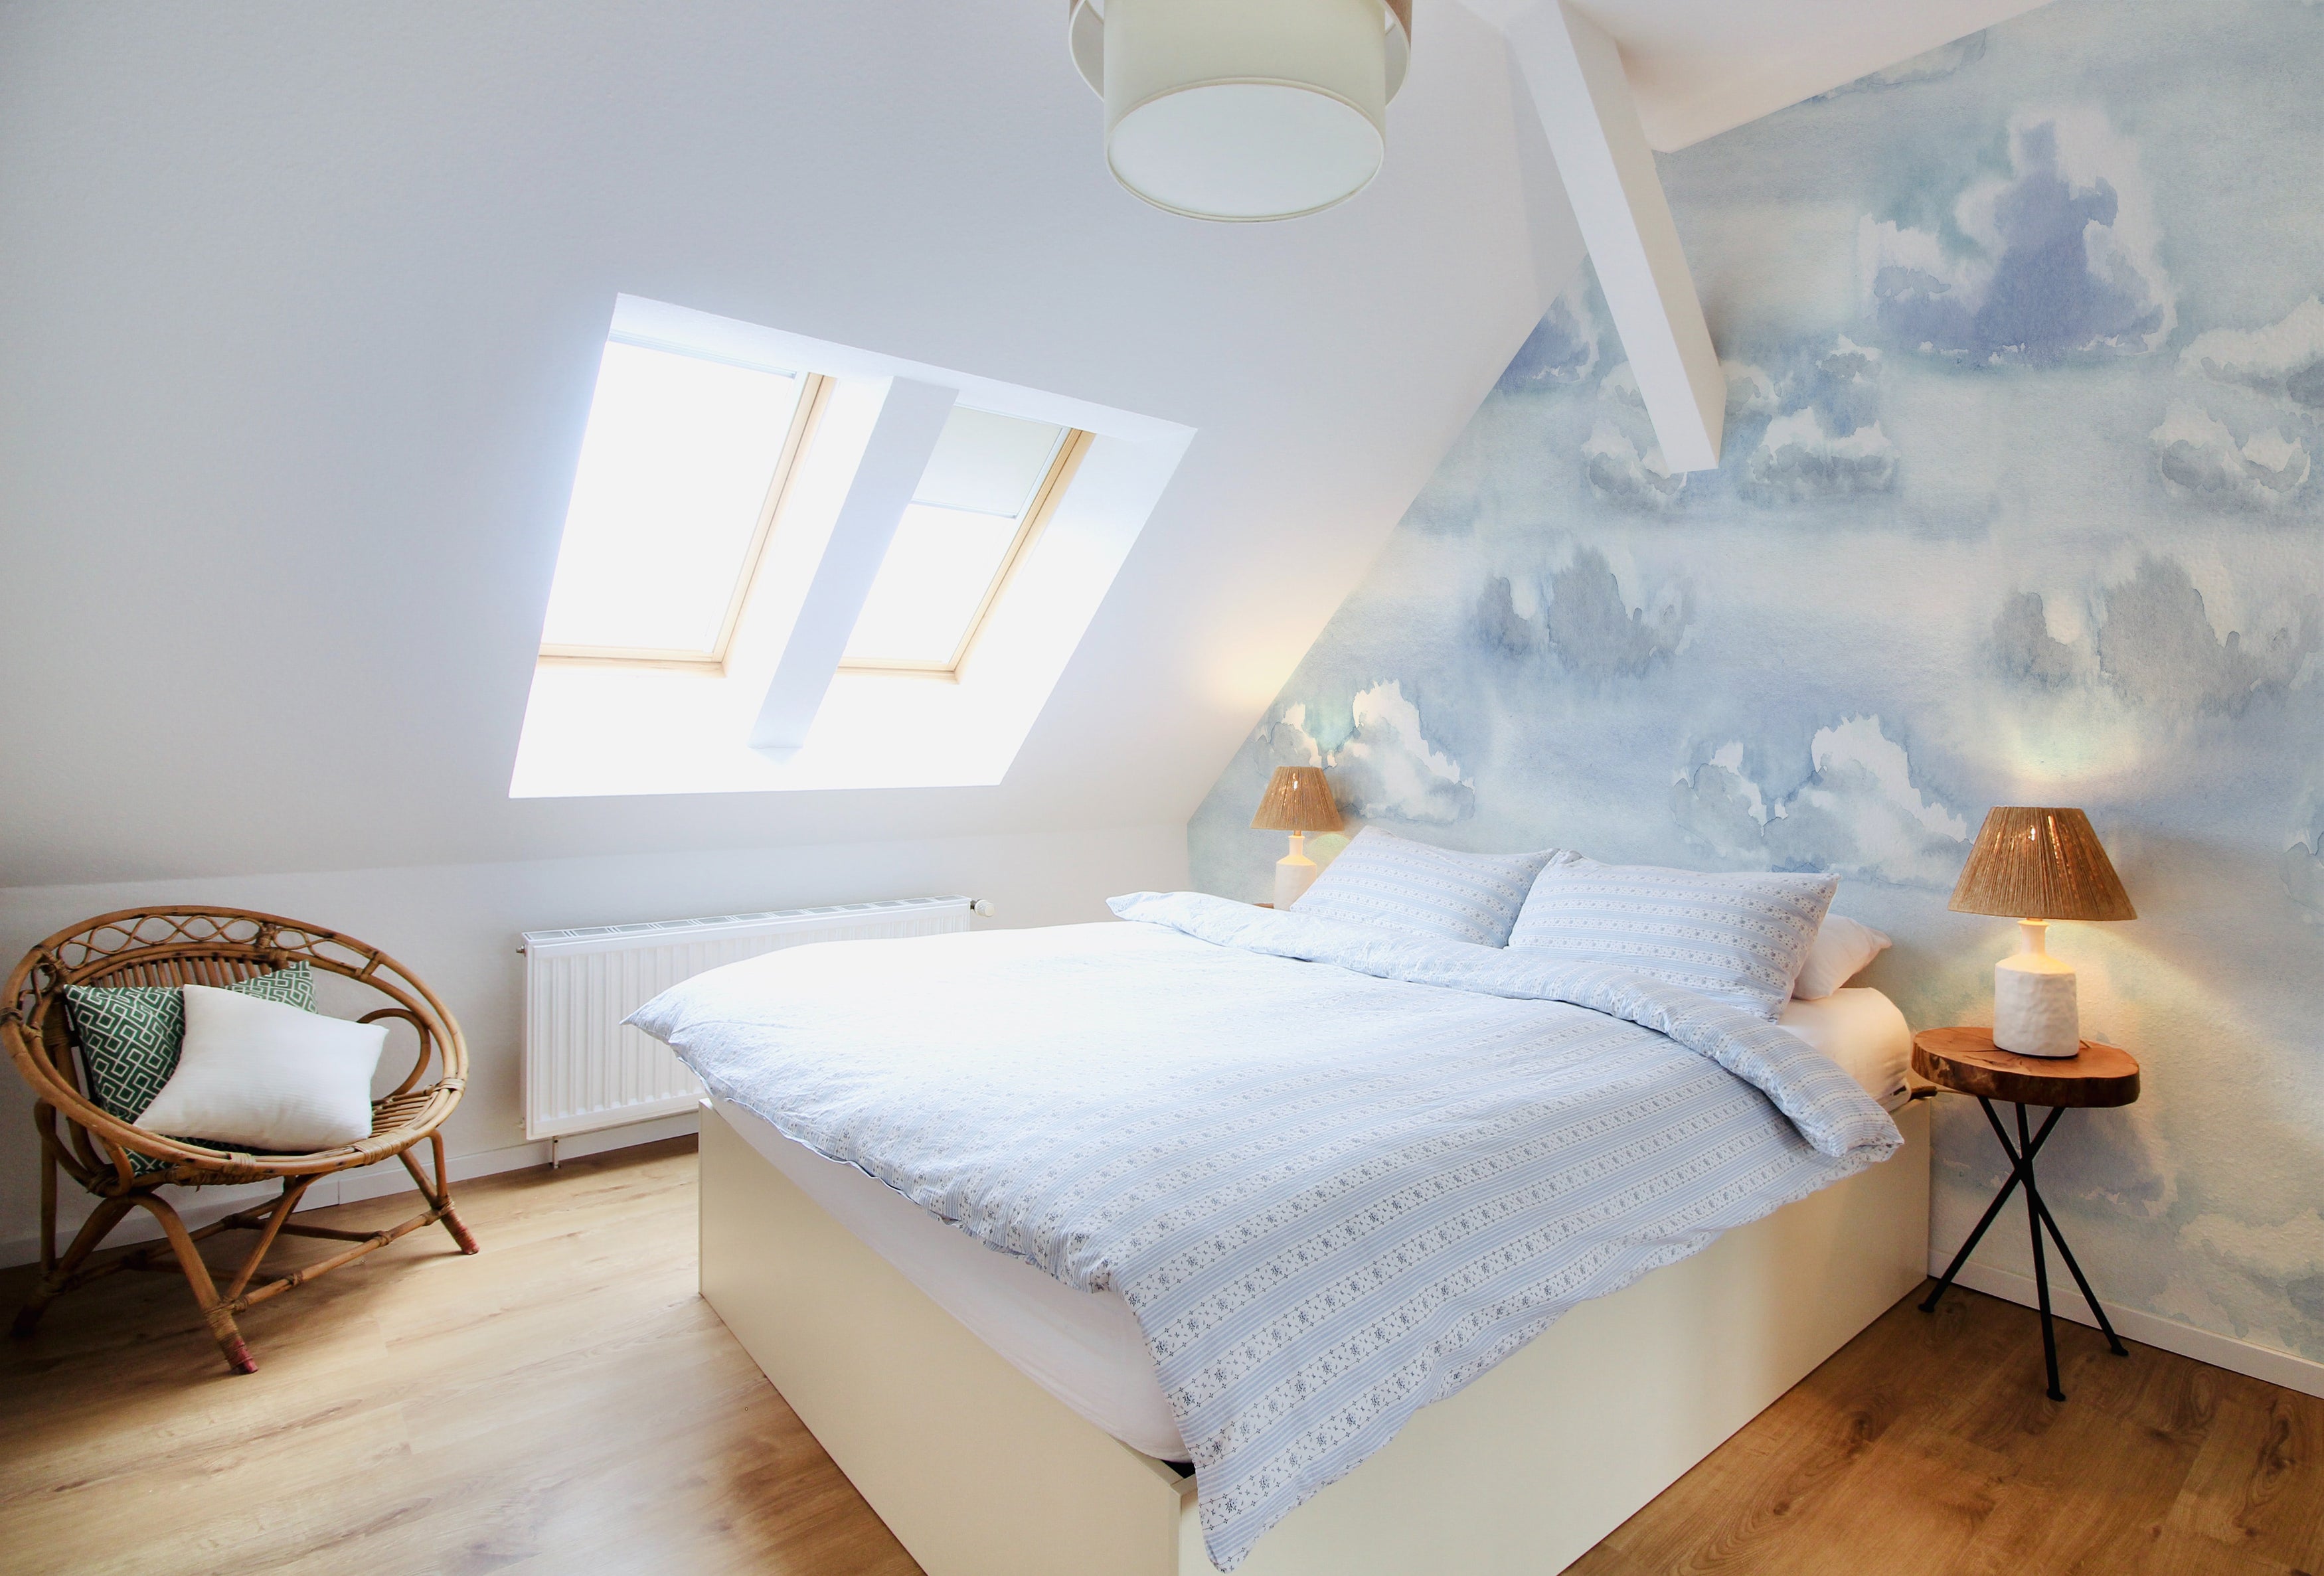 The Watercolour Cloud and Skies II wallpaper adorning a bedroom wall behind a neatly made bed, evoking a calm and dreamy atmosphere in the space.